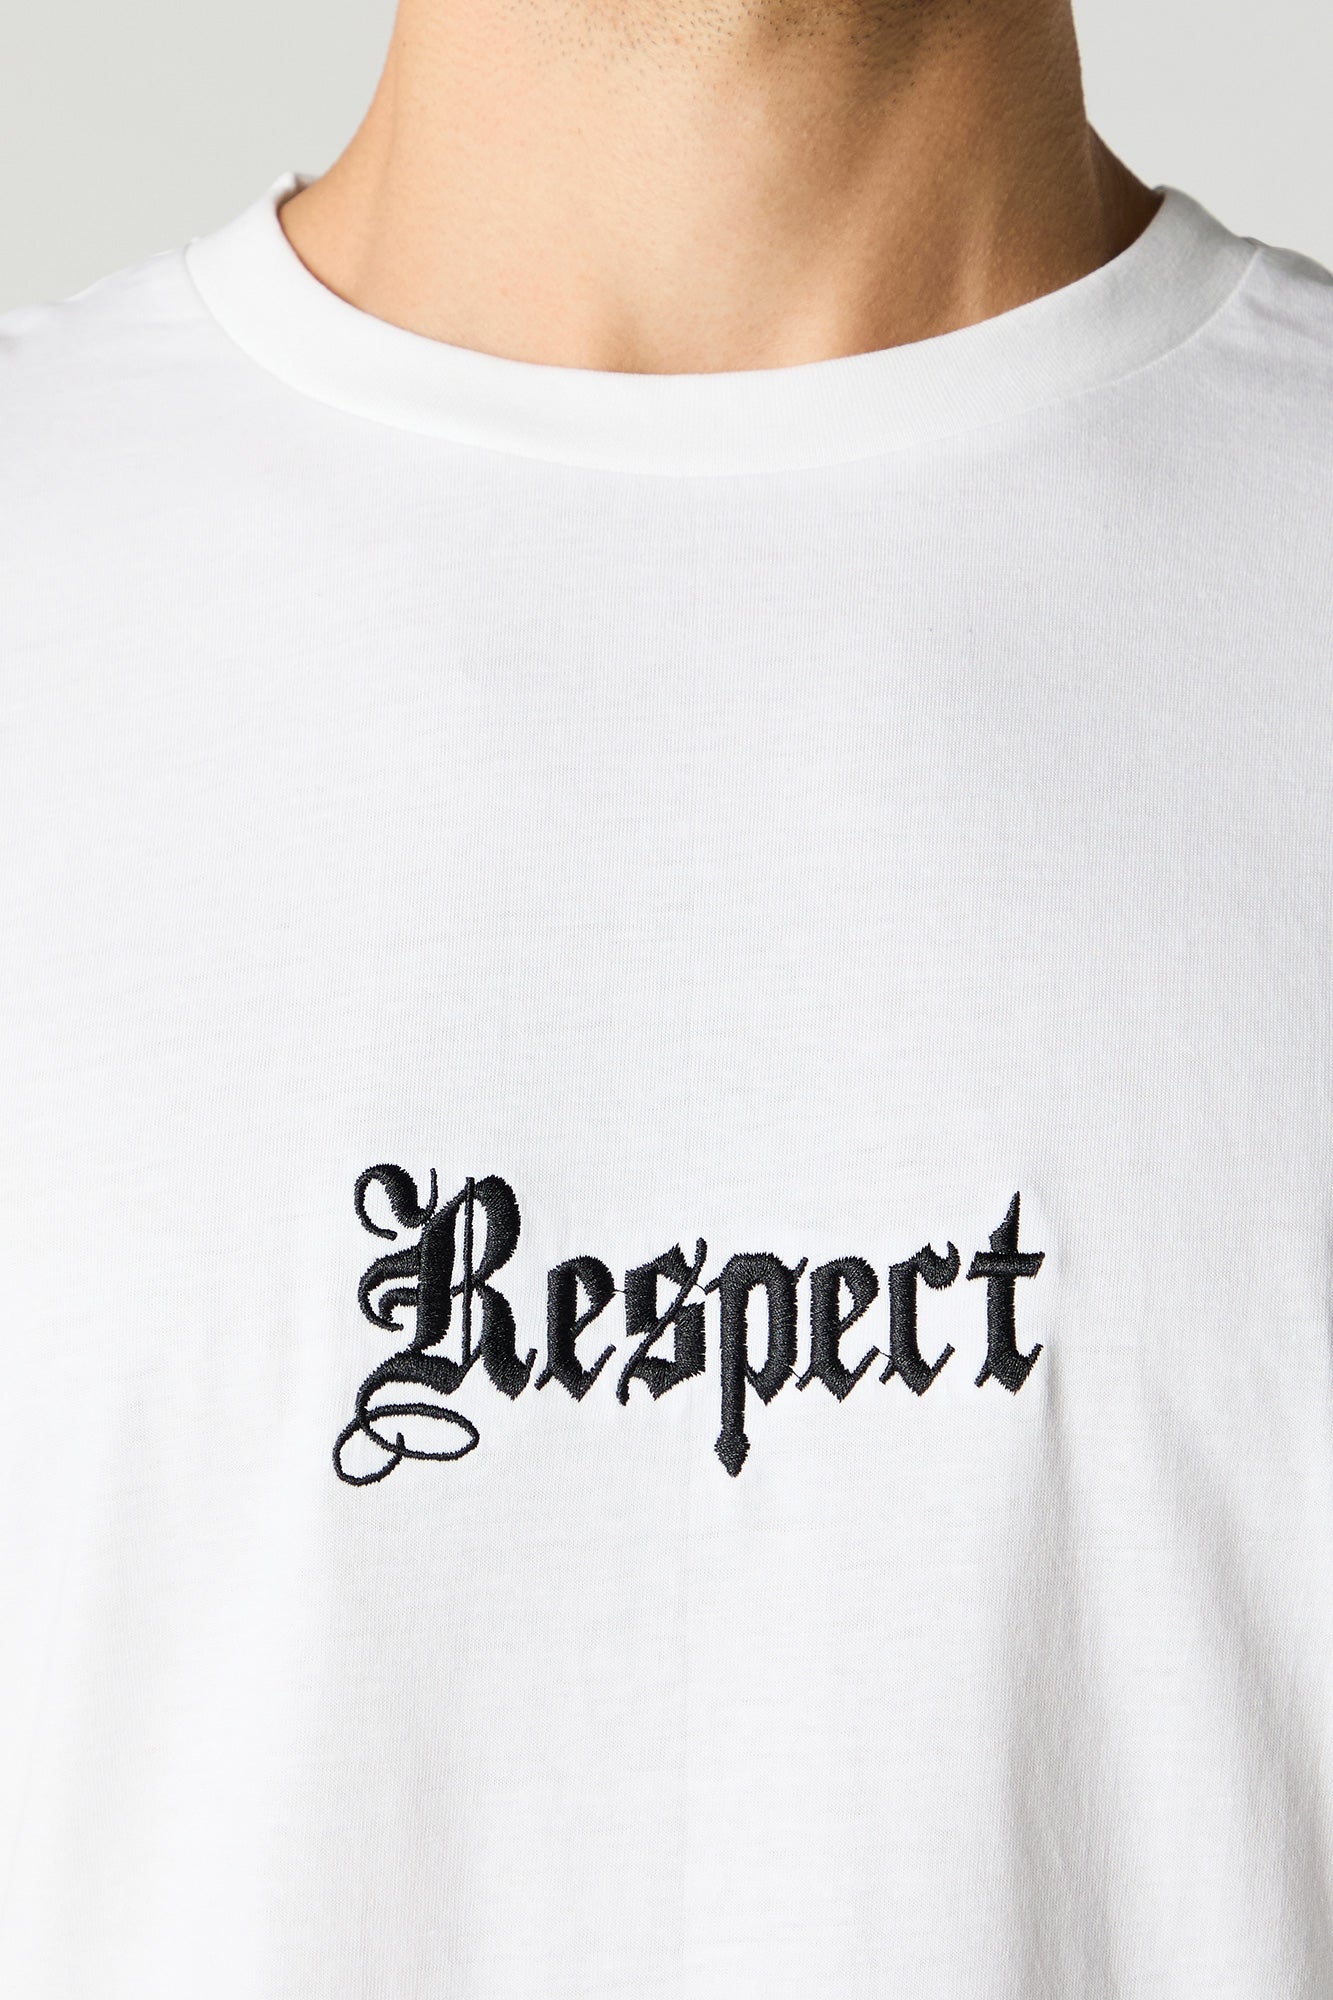 Respect Embroidered T-Shirt